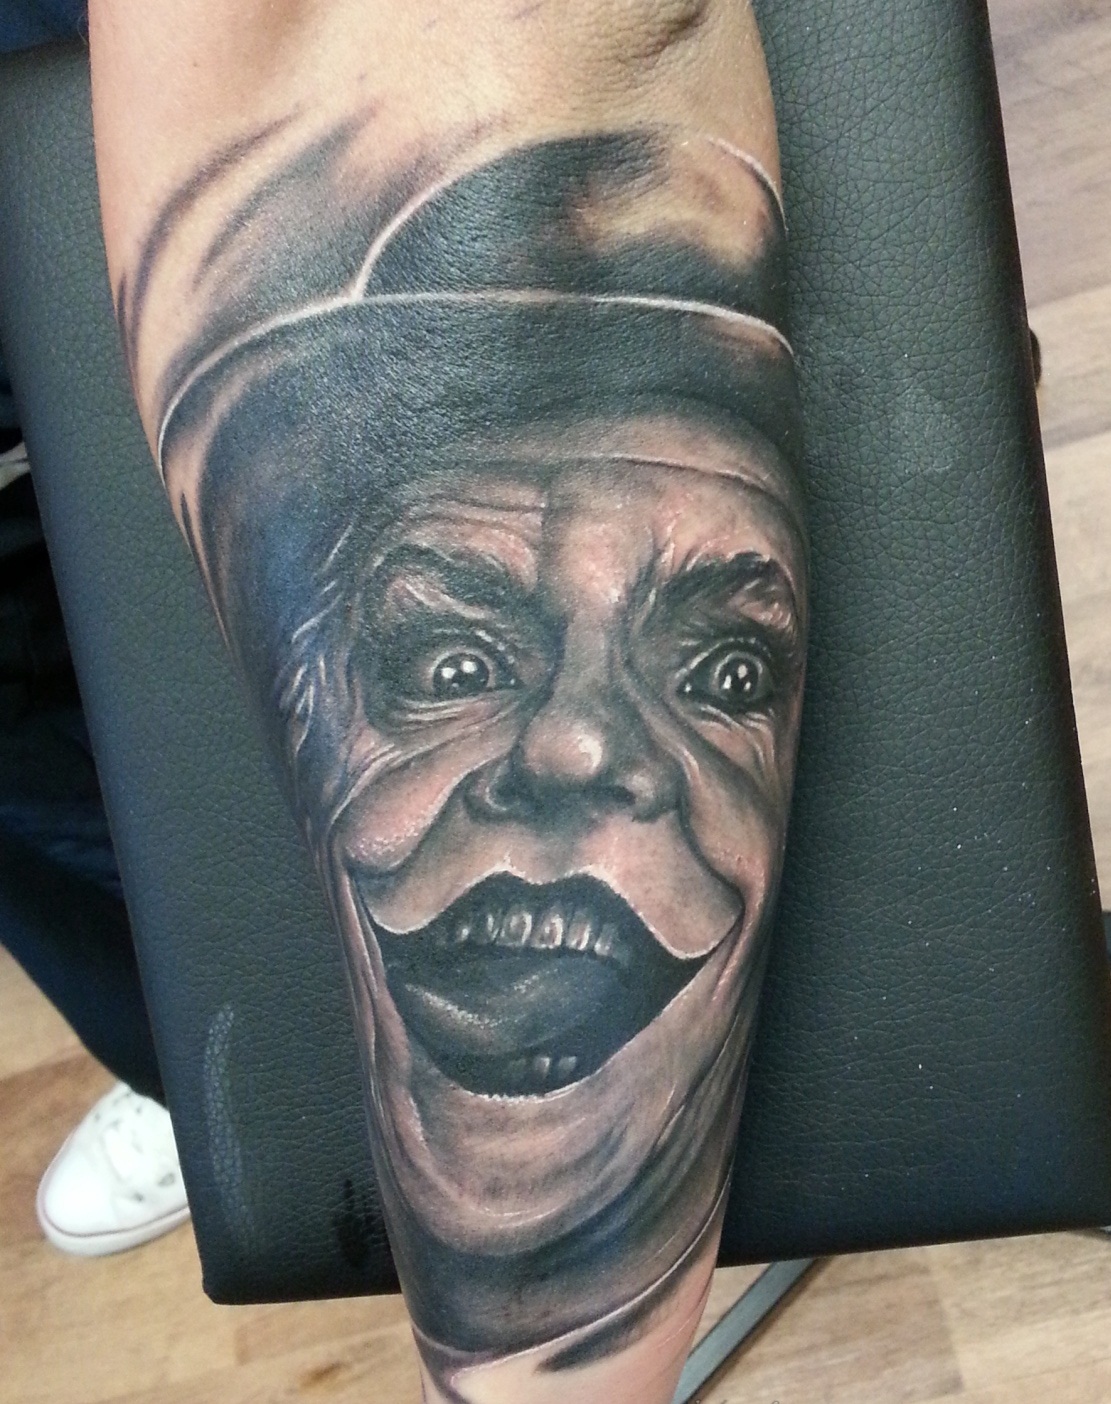 Joker Tattoos Designs, Ideas and Meaning